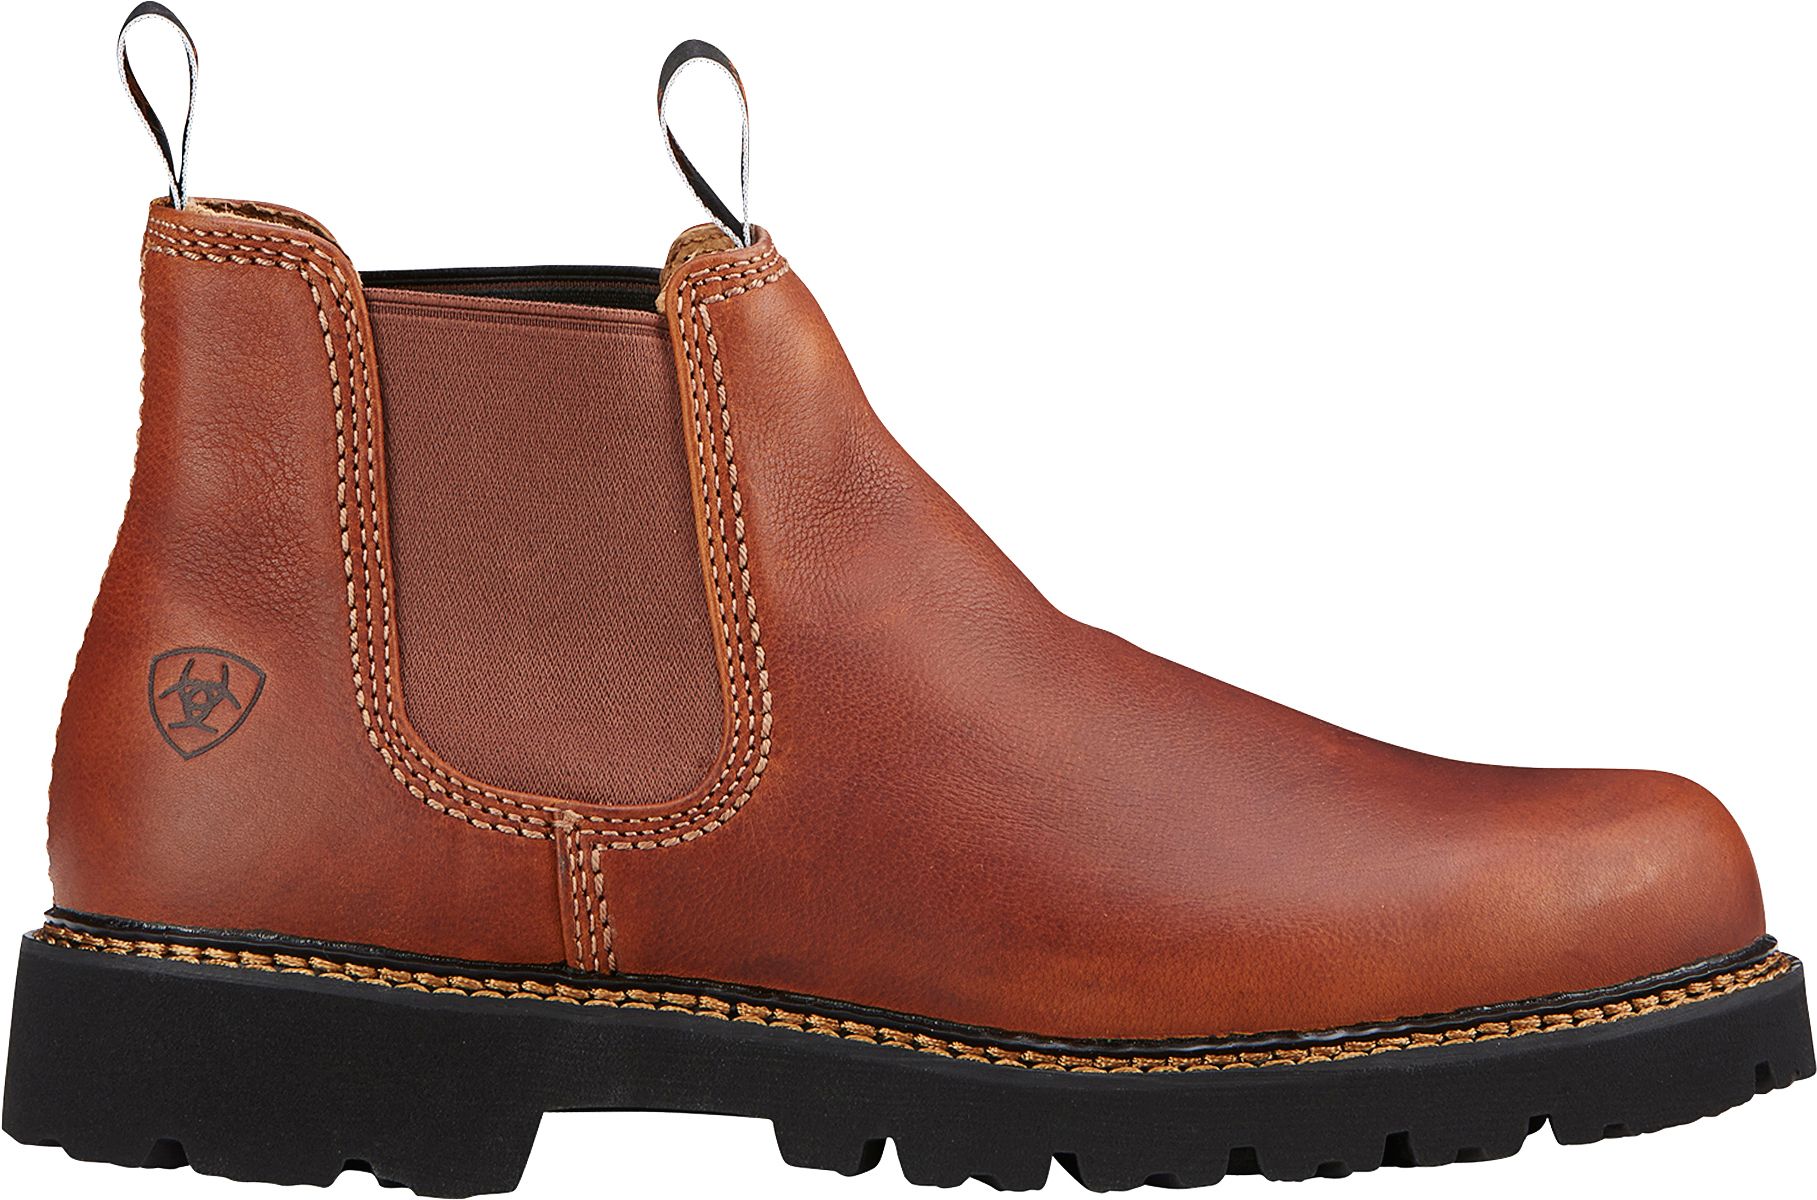 ariat men's pull on work boots